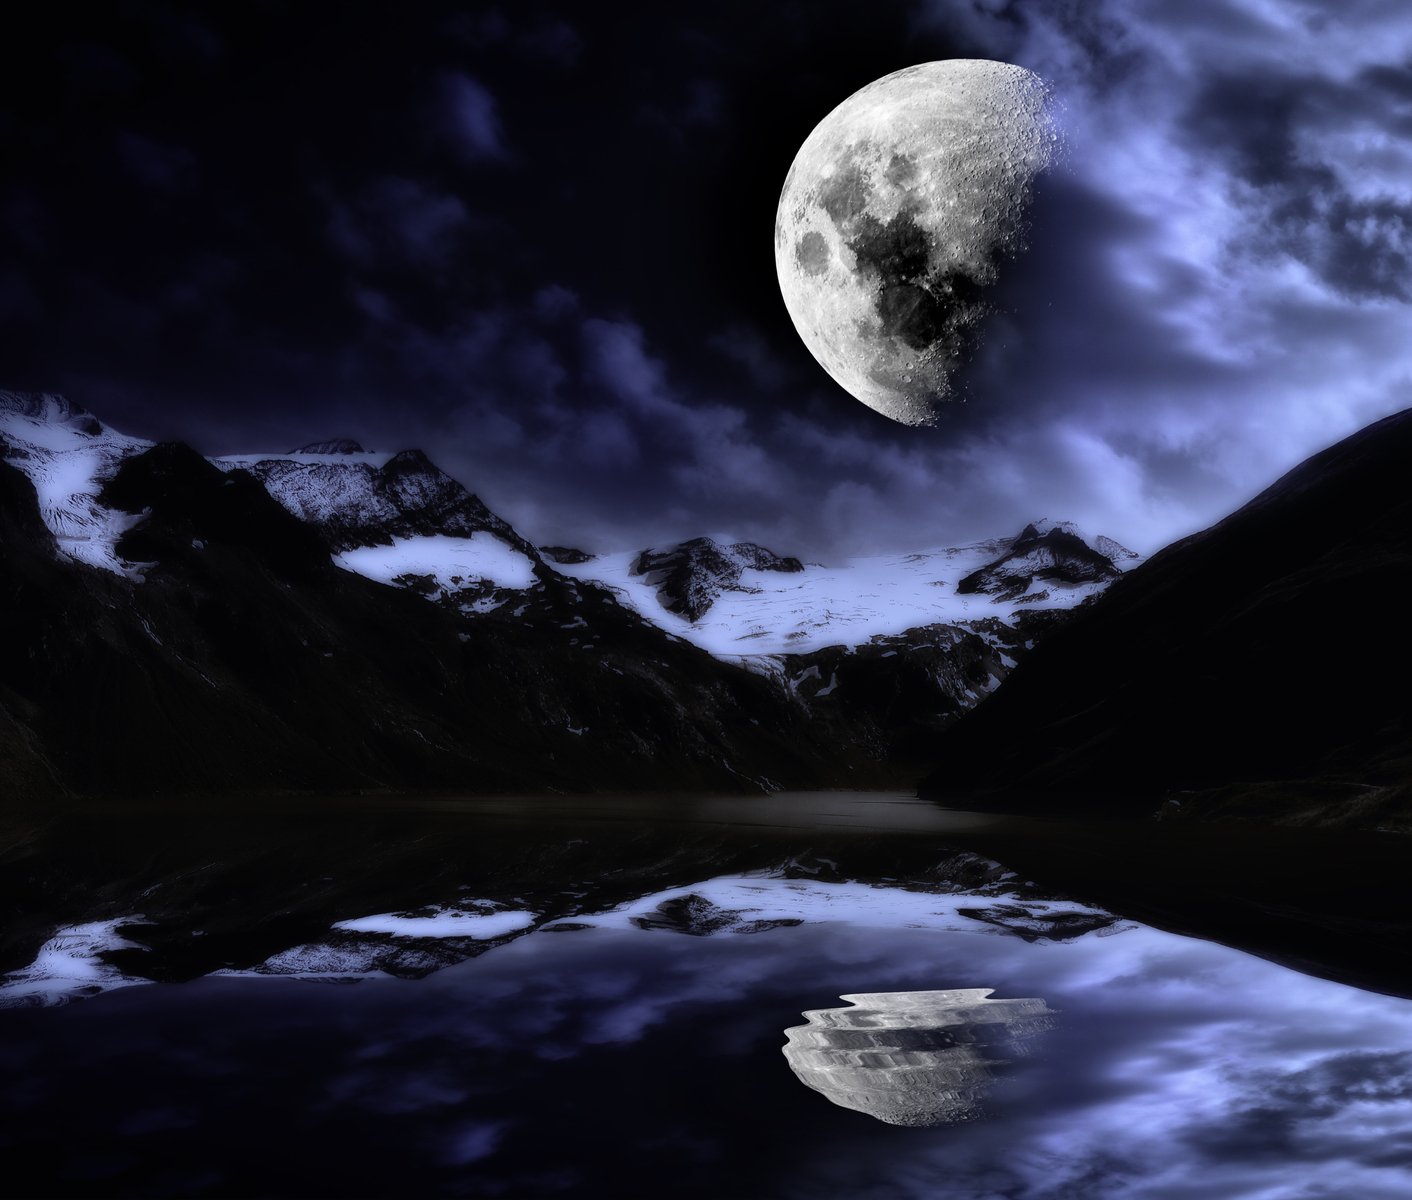 two mountains reflecting in water at night with the moon